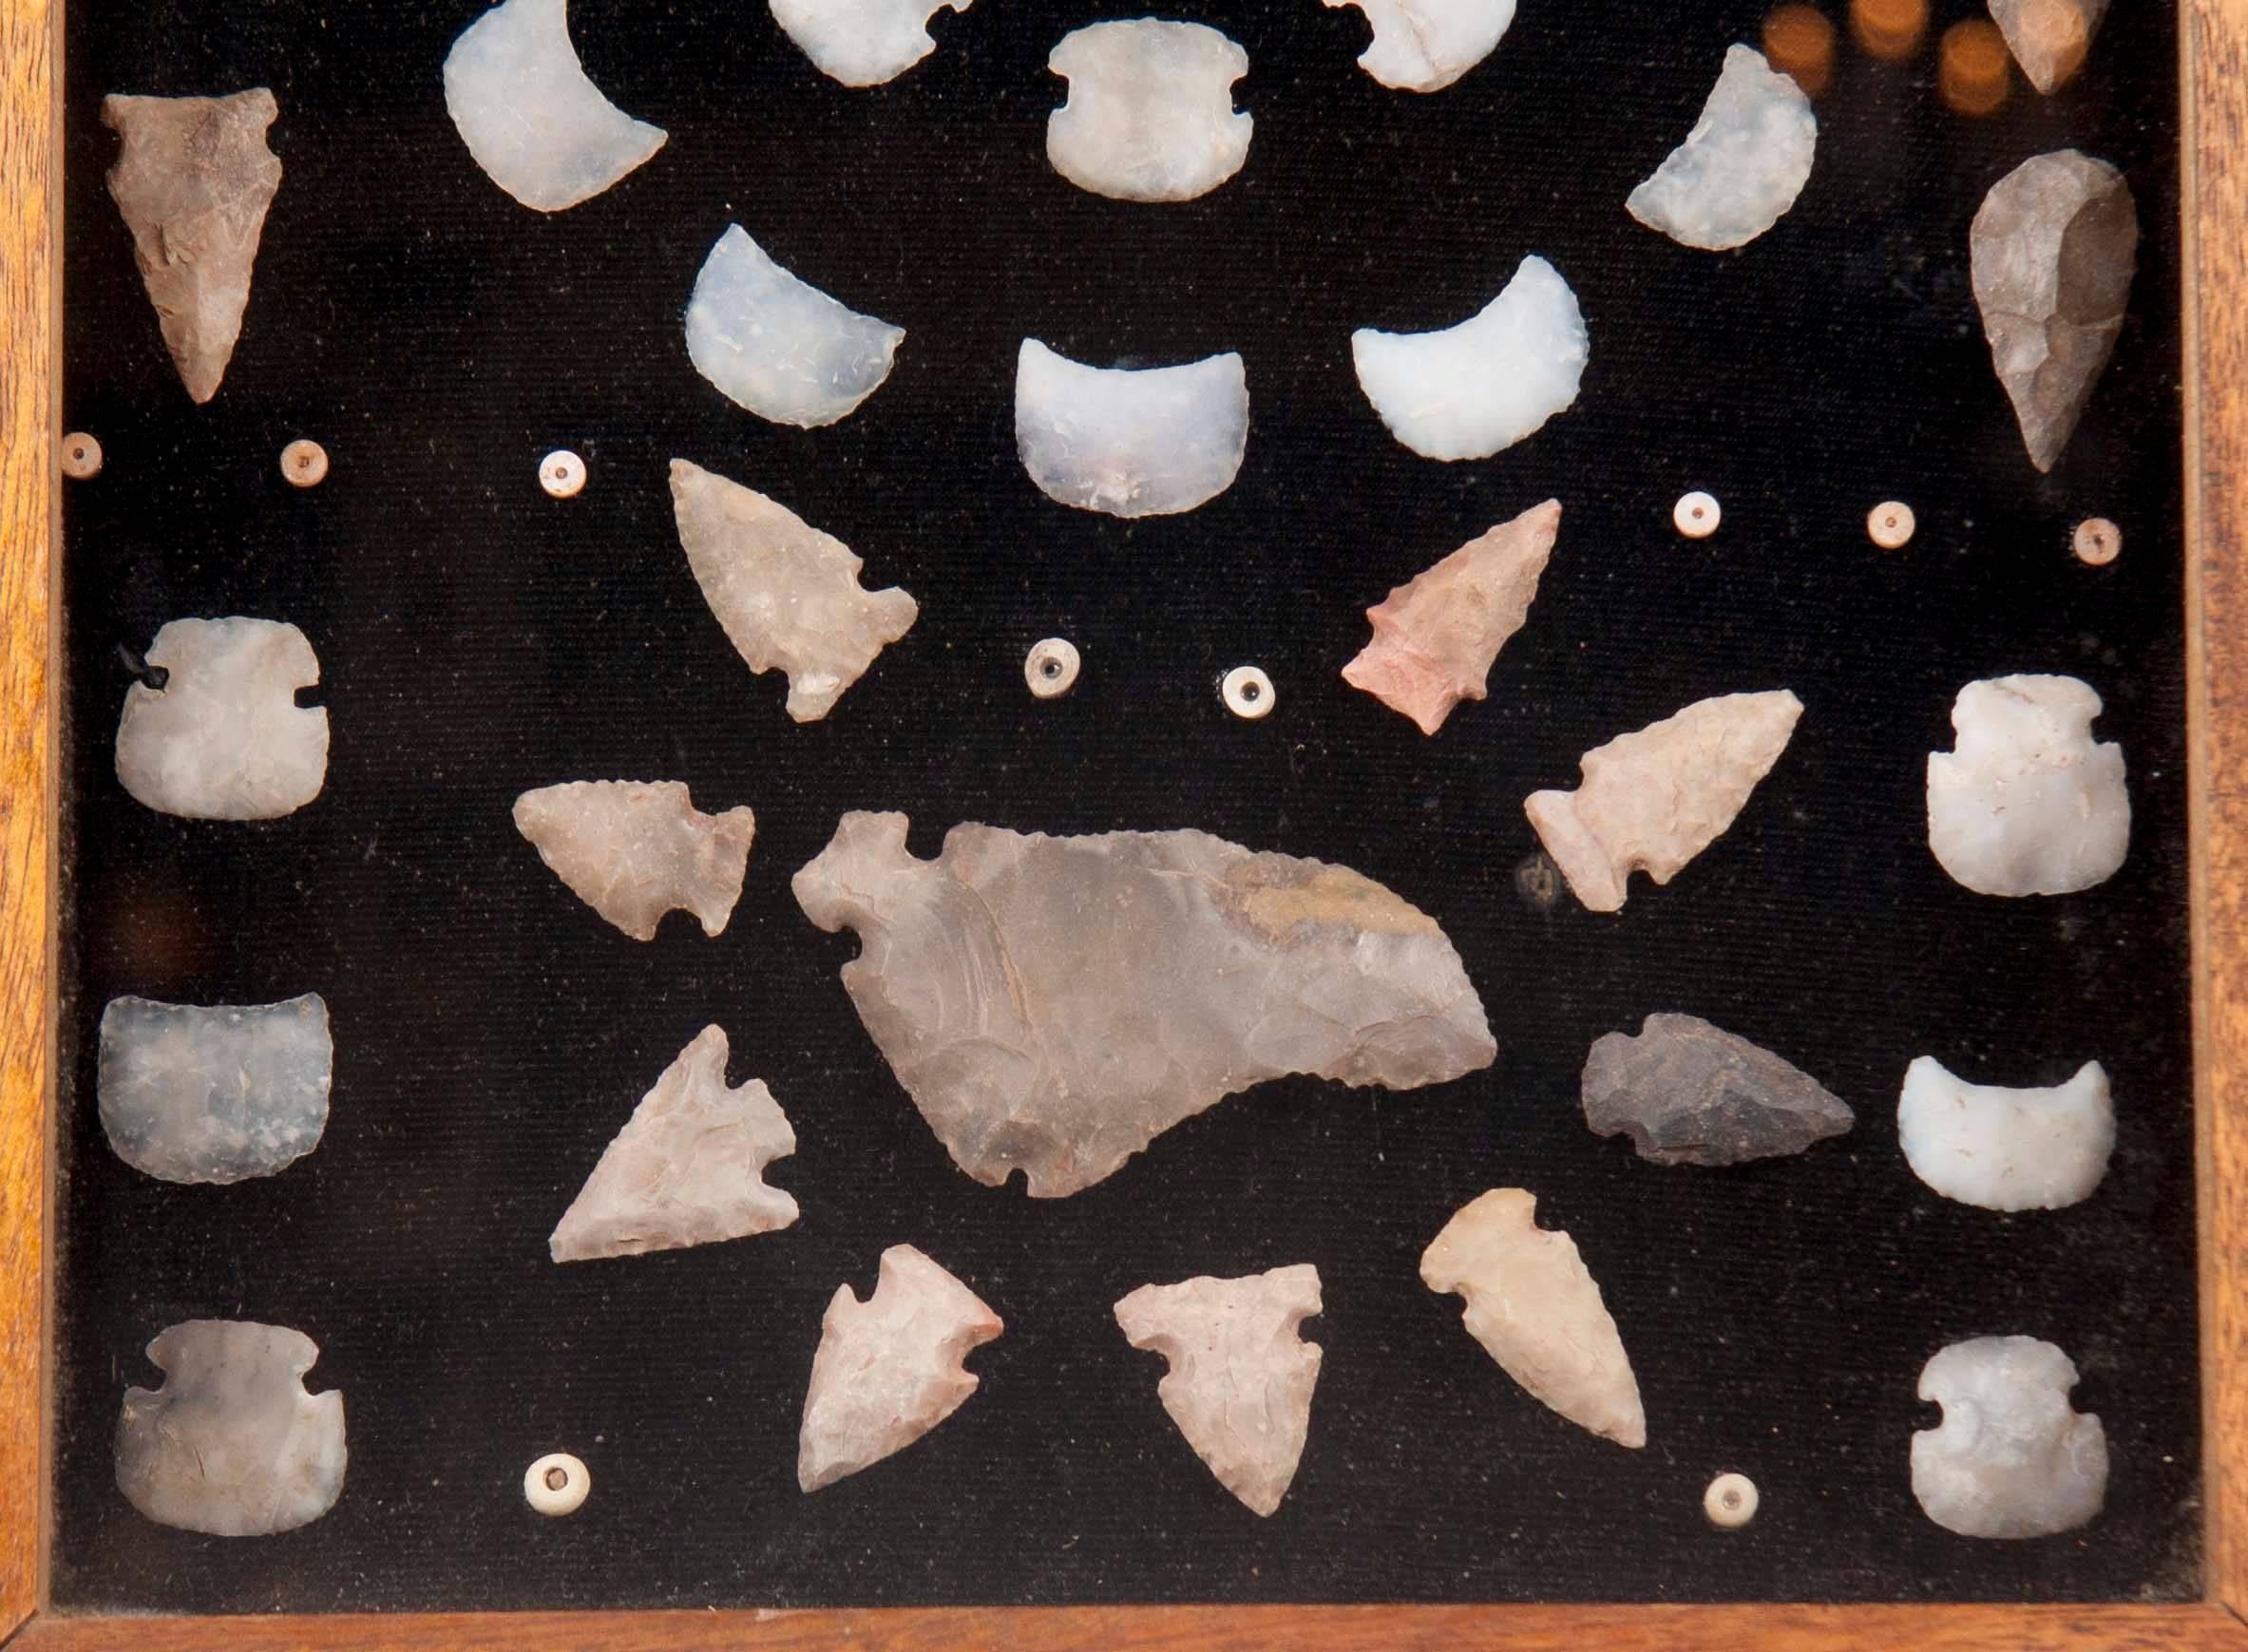 Primitive American Indian Arrowhead and Artifact Collection